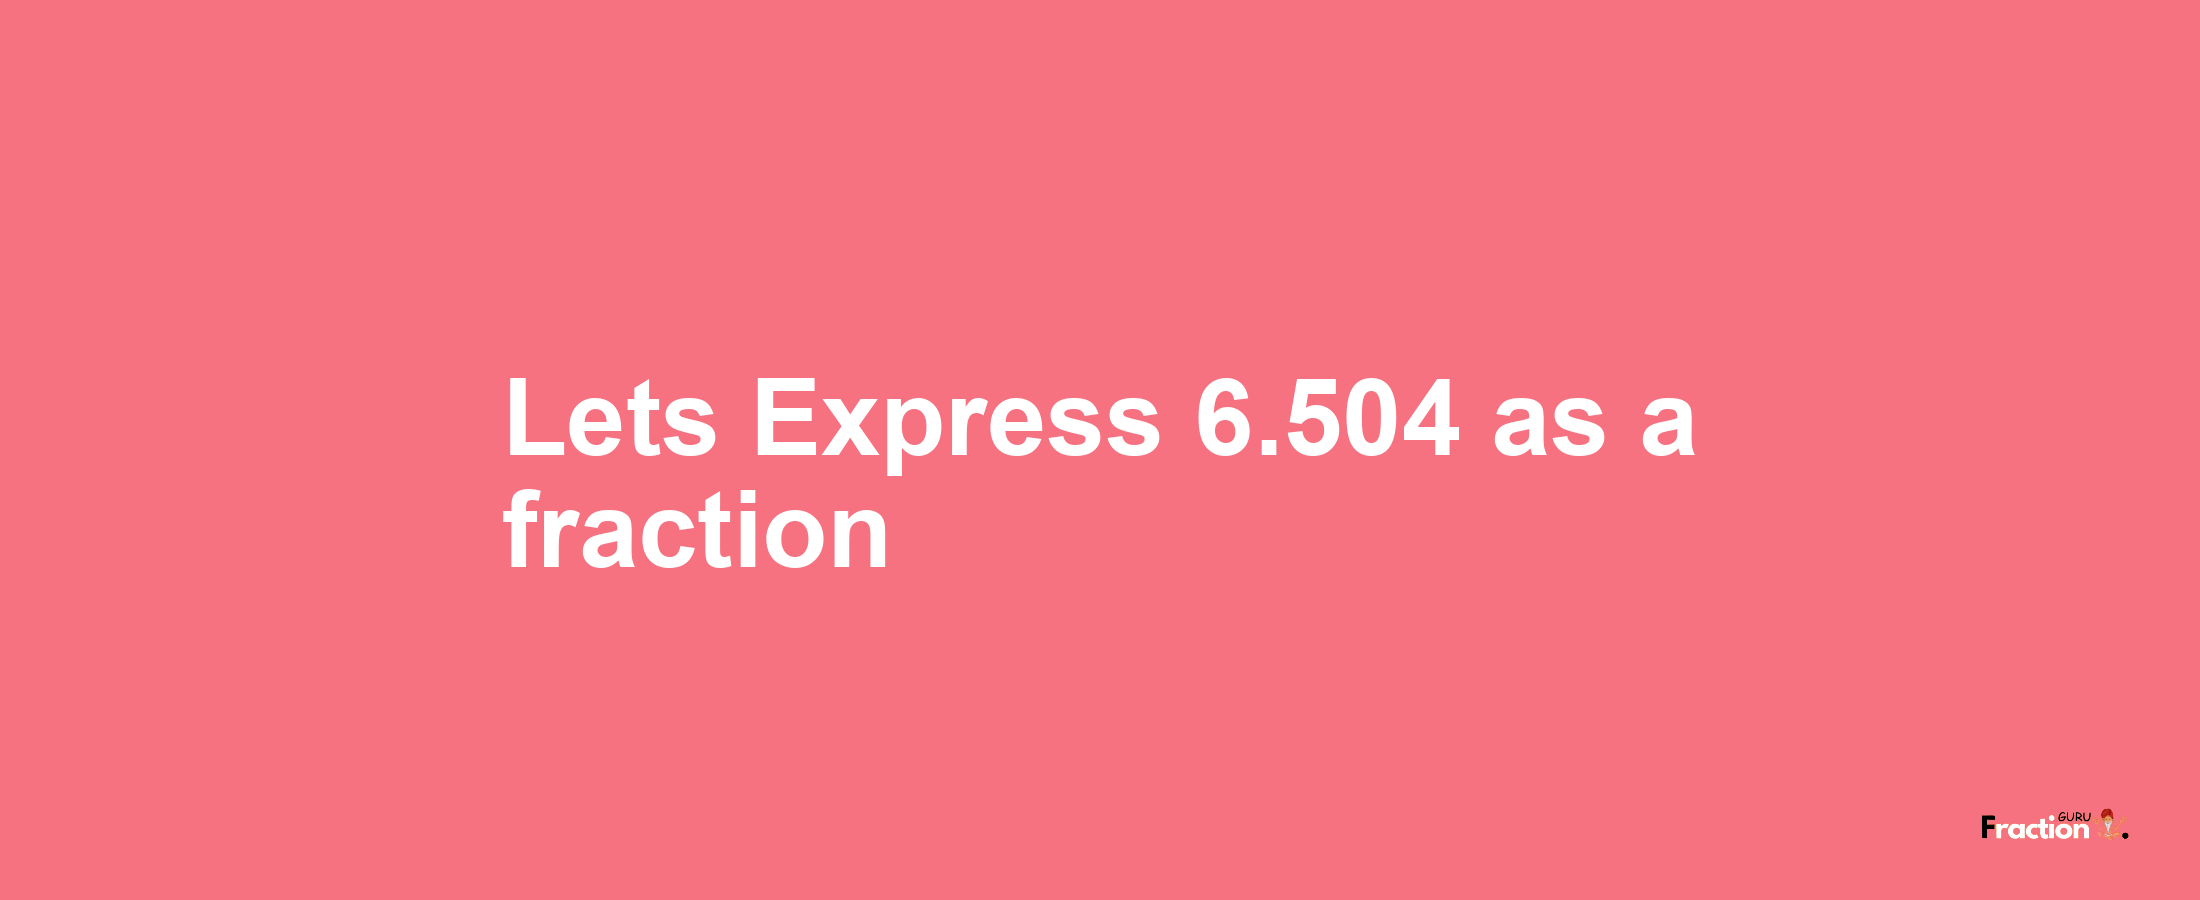 Lets Express 6.504 as afraction